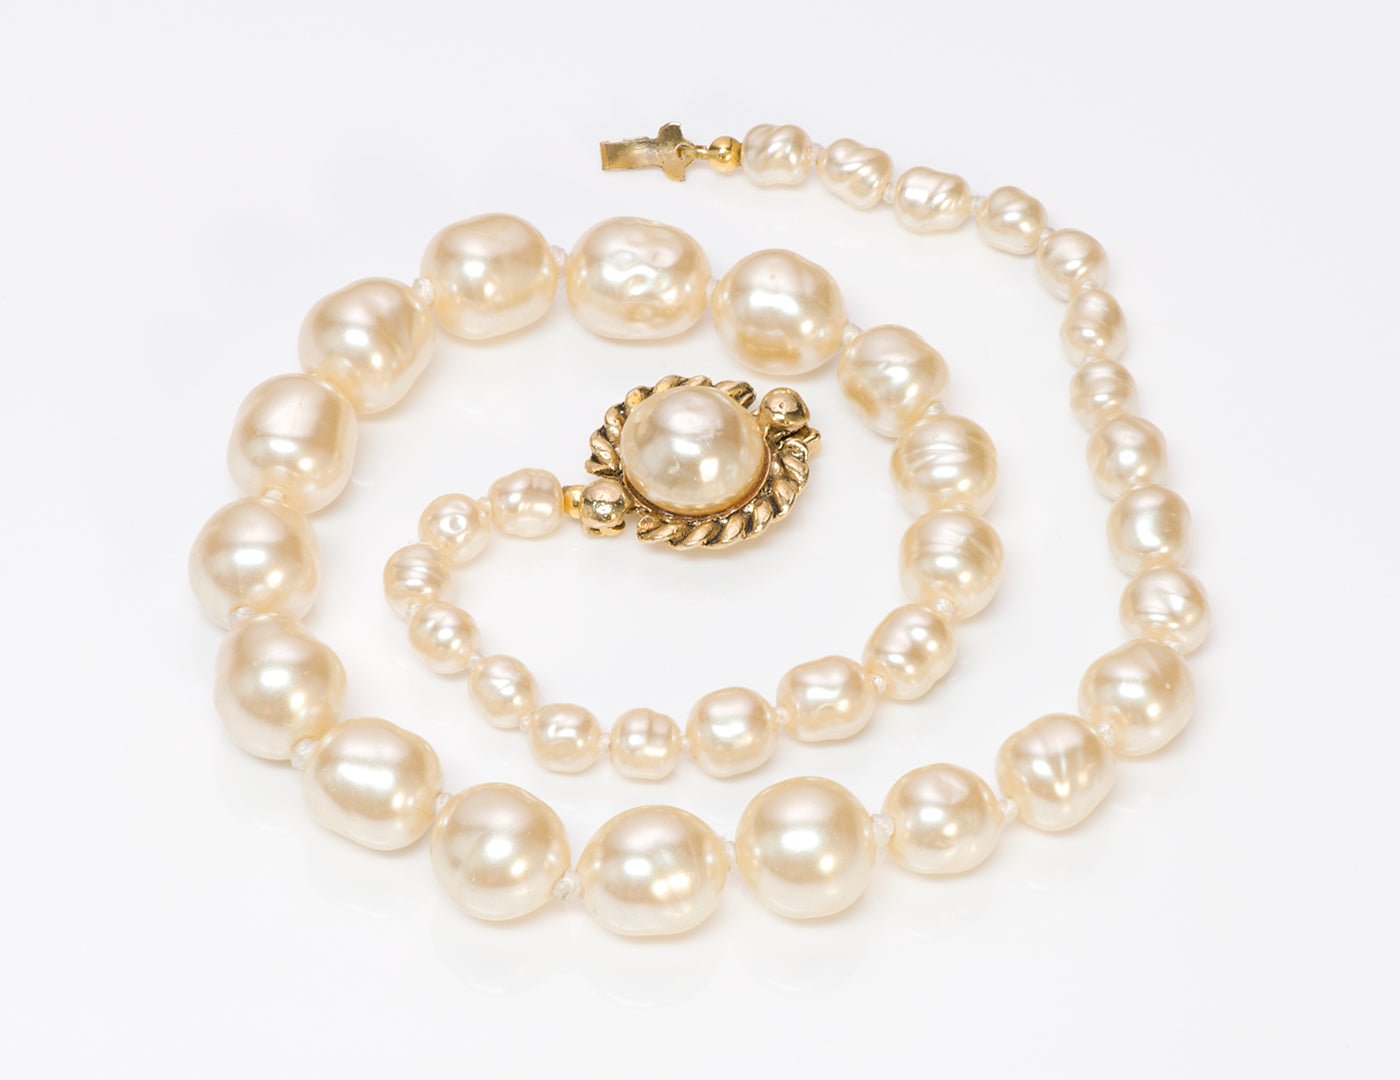 Vintage Chanel 1981 Pearl Strand Necklace